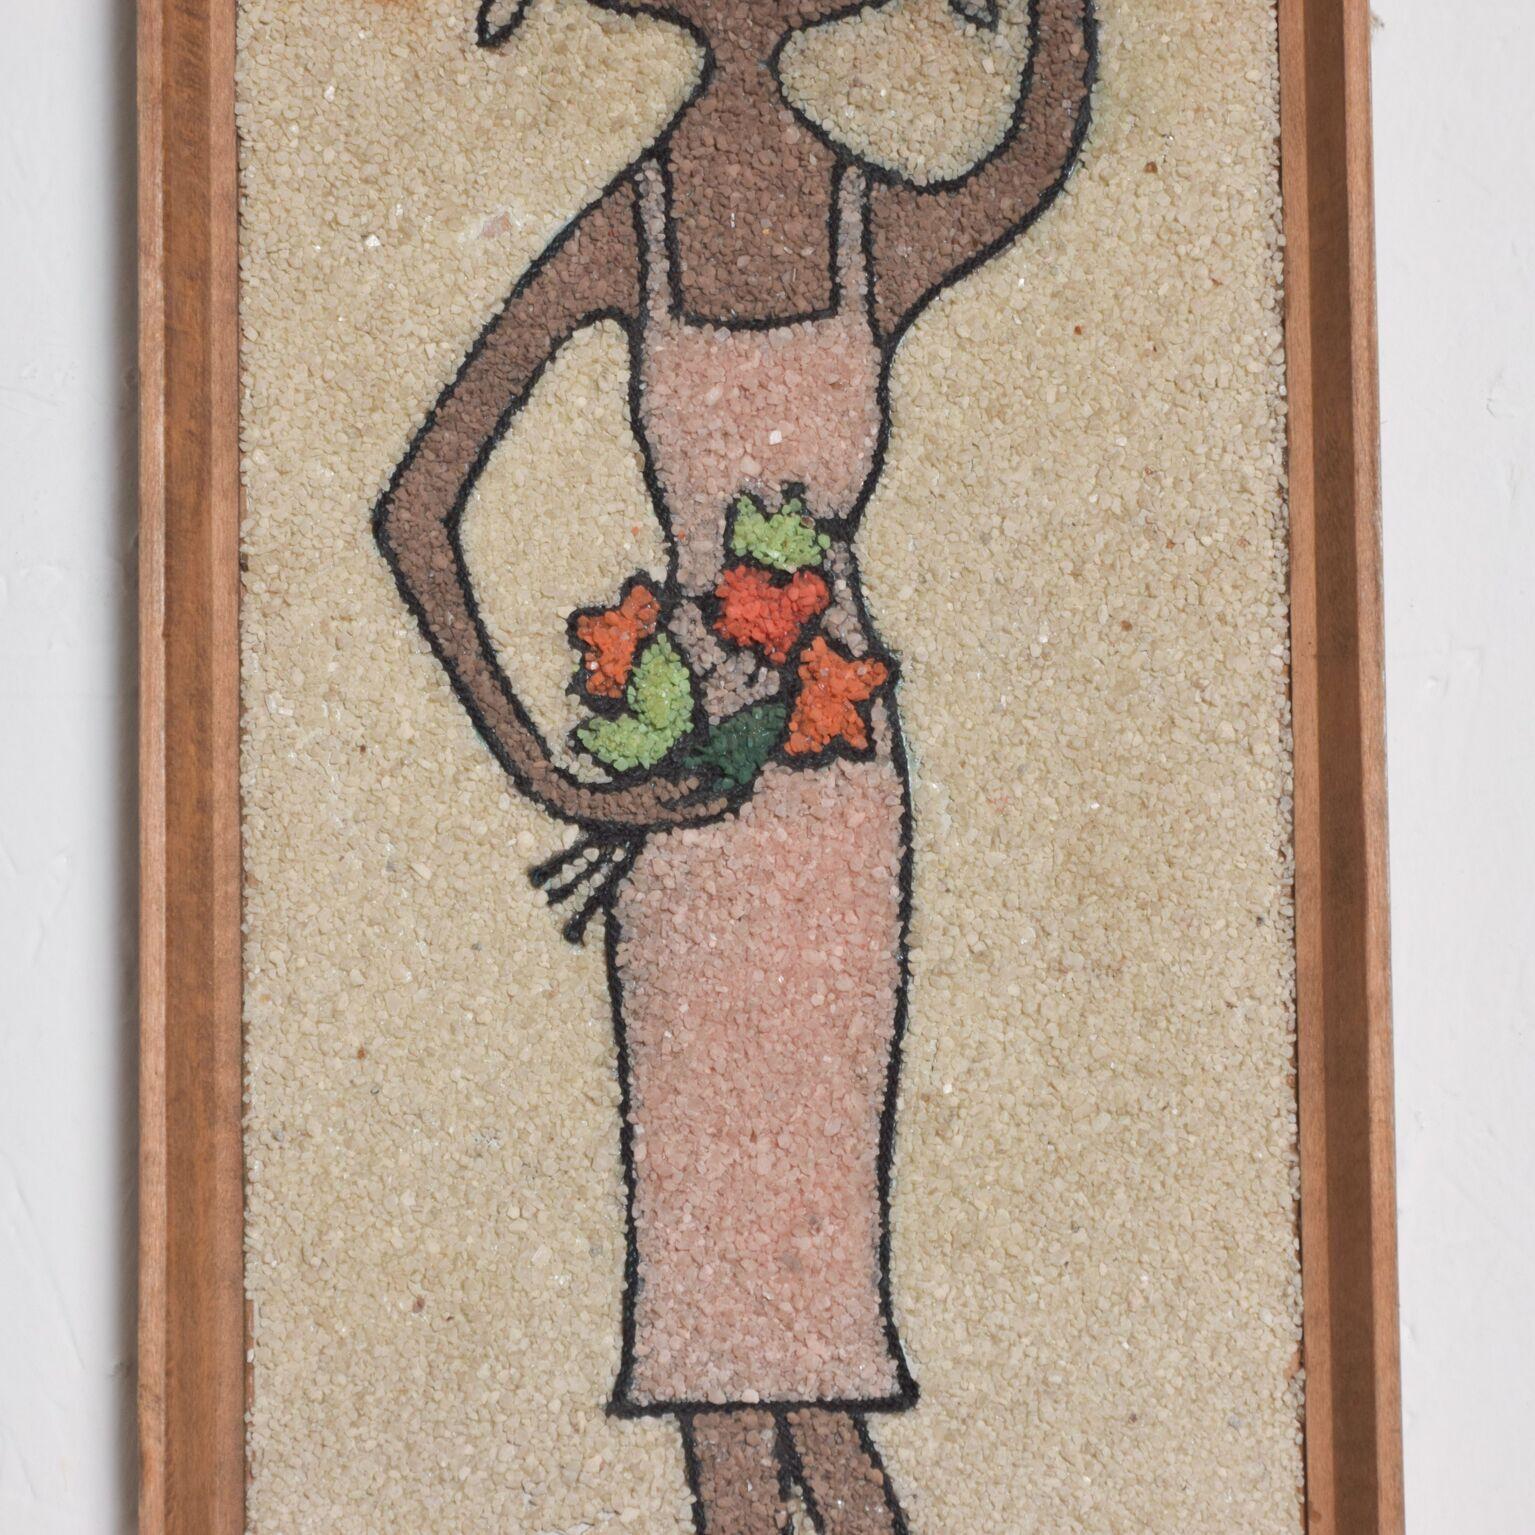 Stone Art
Fabulous and fun stone wall art mixed media woman carrying fruit basket on head with flowers, Folk Art Mexico circa 1960s
9 W x 25 H x 1.13 art 7.63 x 24
Original Unrestored Vintage Condition
See images.